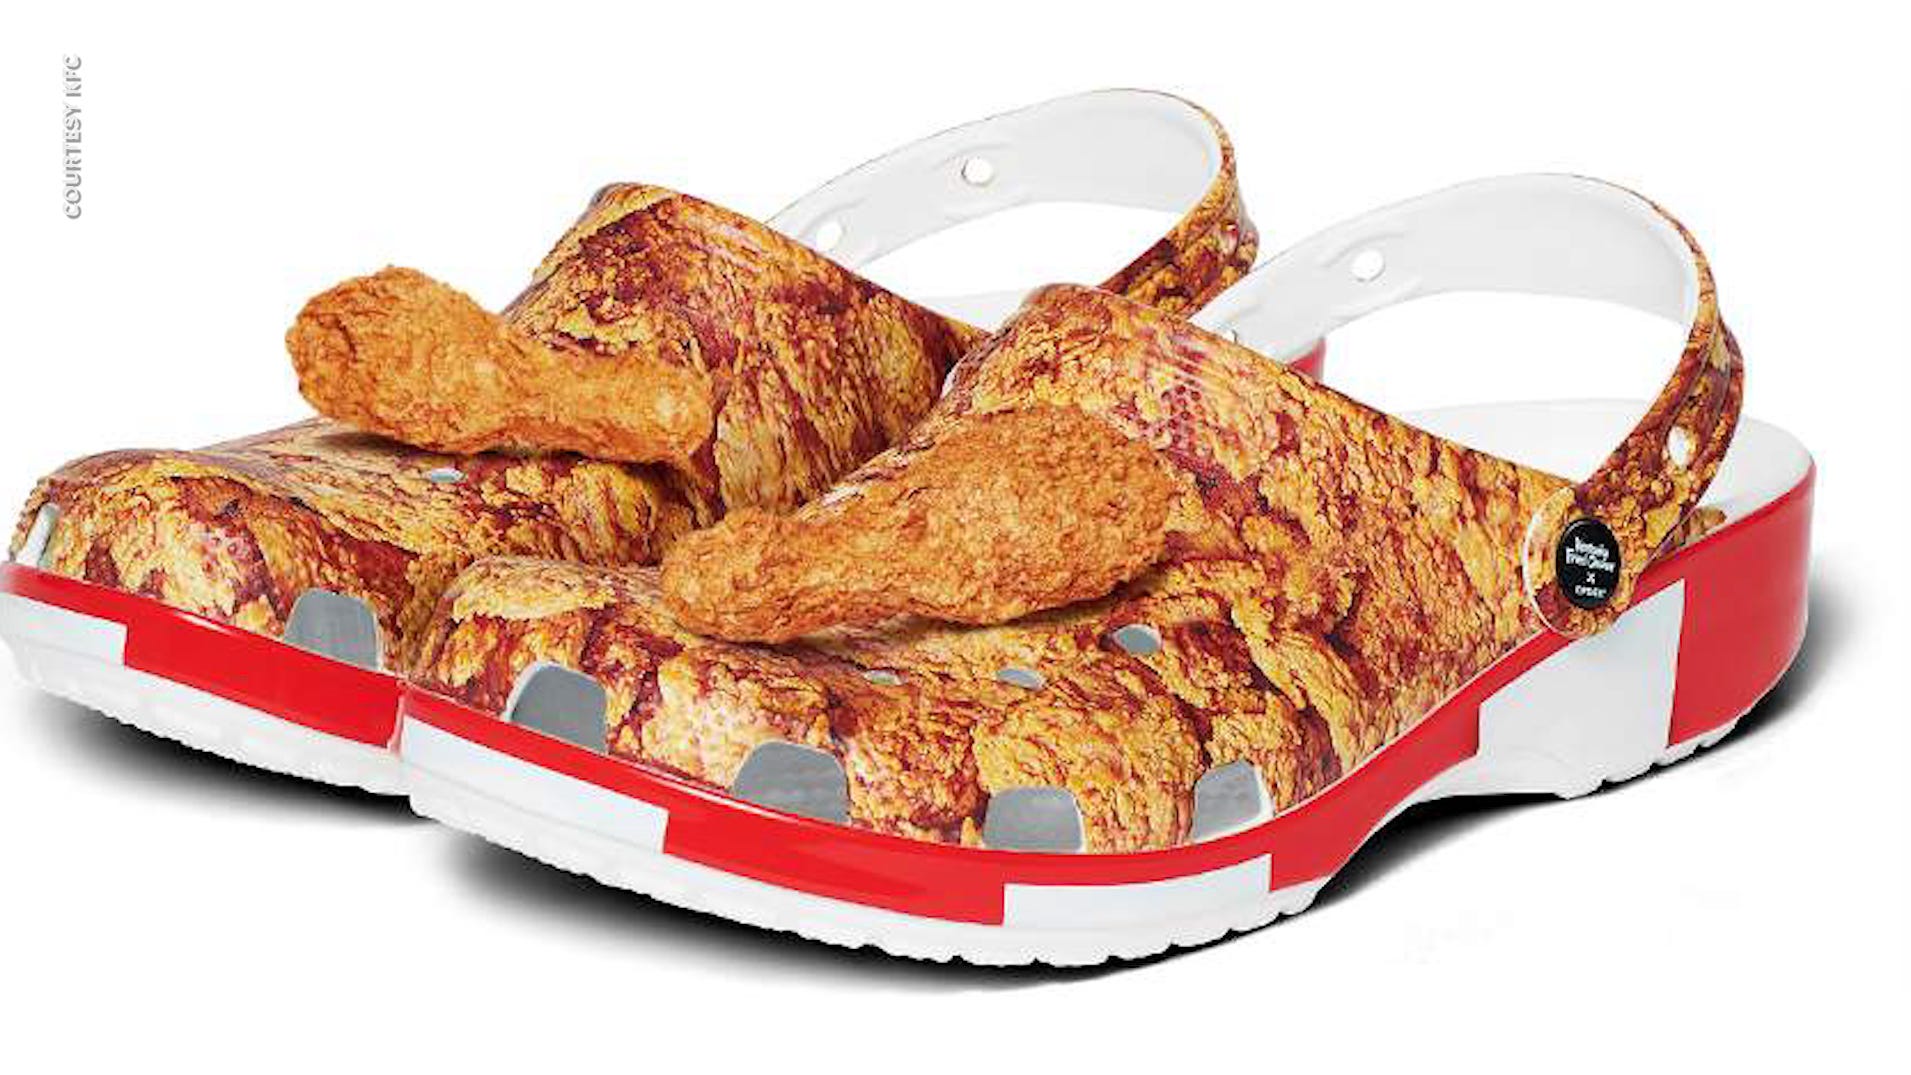 KFC partners with Crocs to release bucket of fried chicken shoes